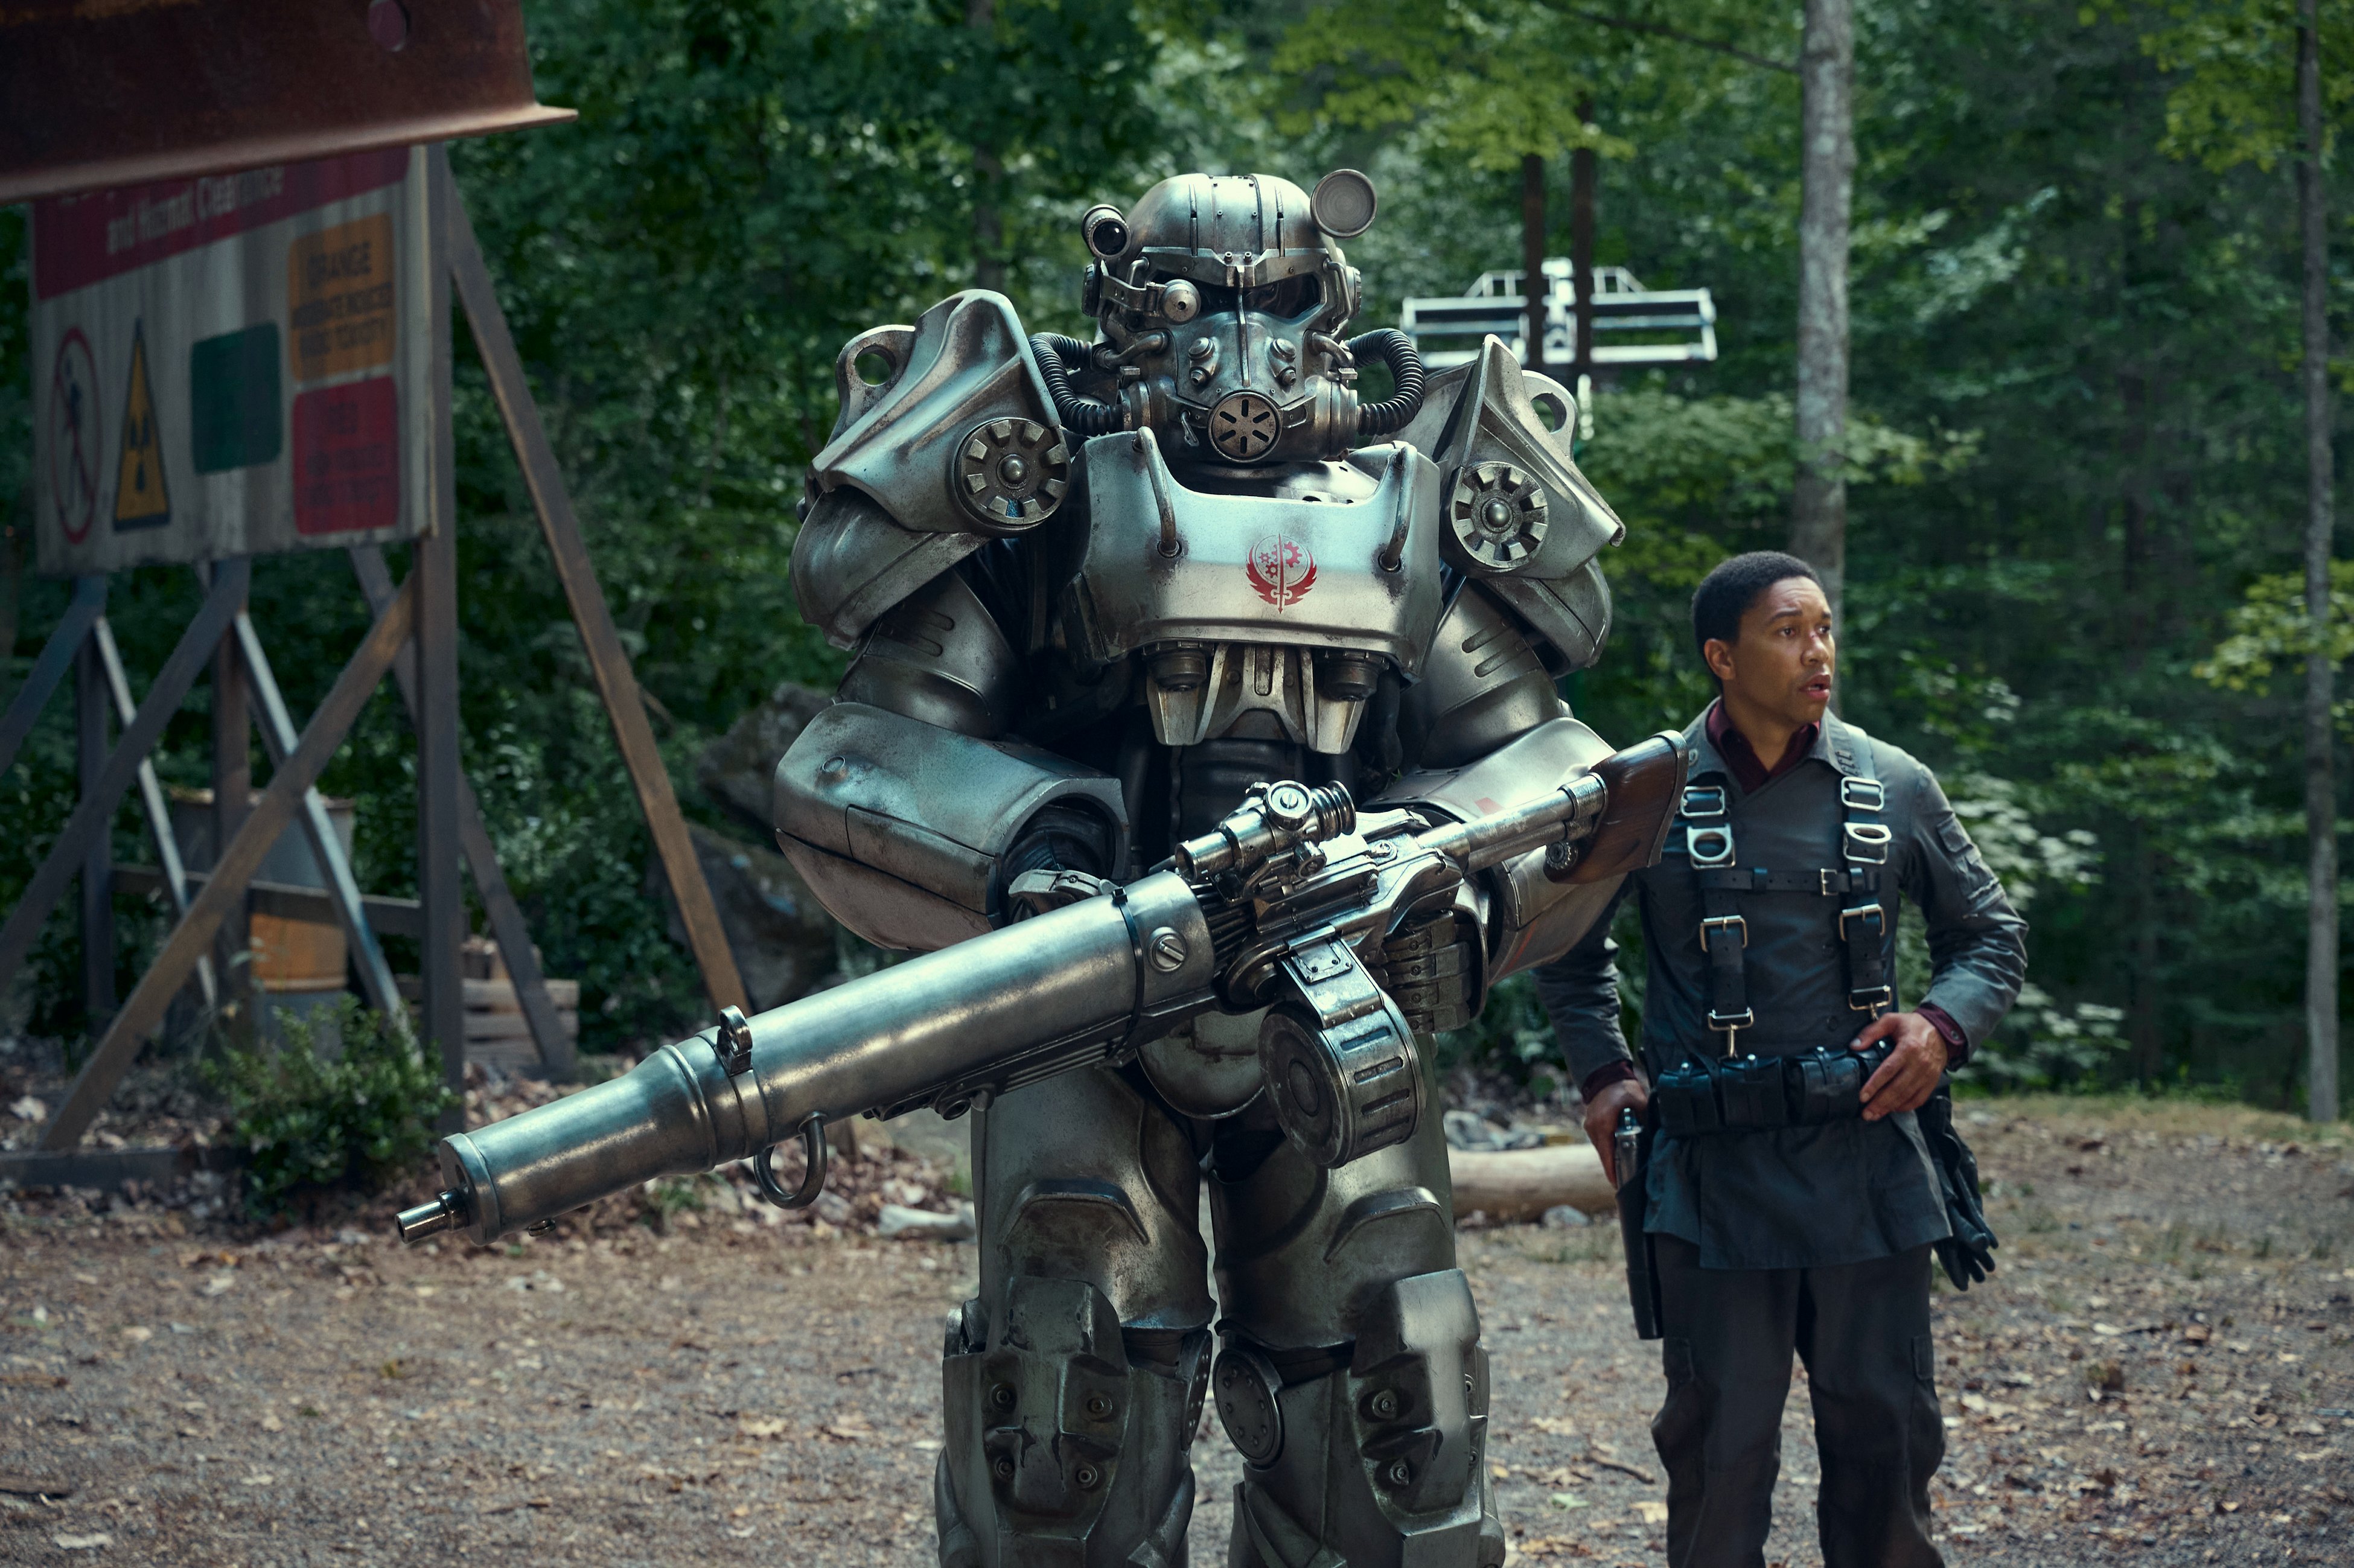 A first look at Aaron Moten as Maximus in the Fallout series coming to Prime Video. He's standing next to someone in Power Armor, a giant metal suit